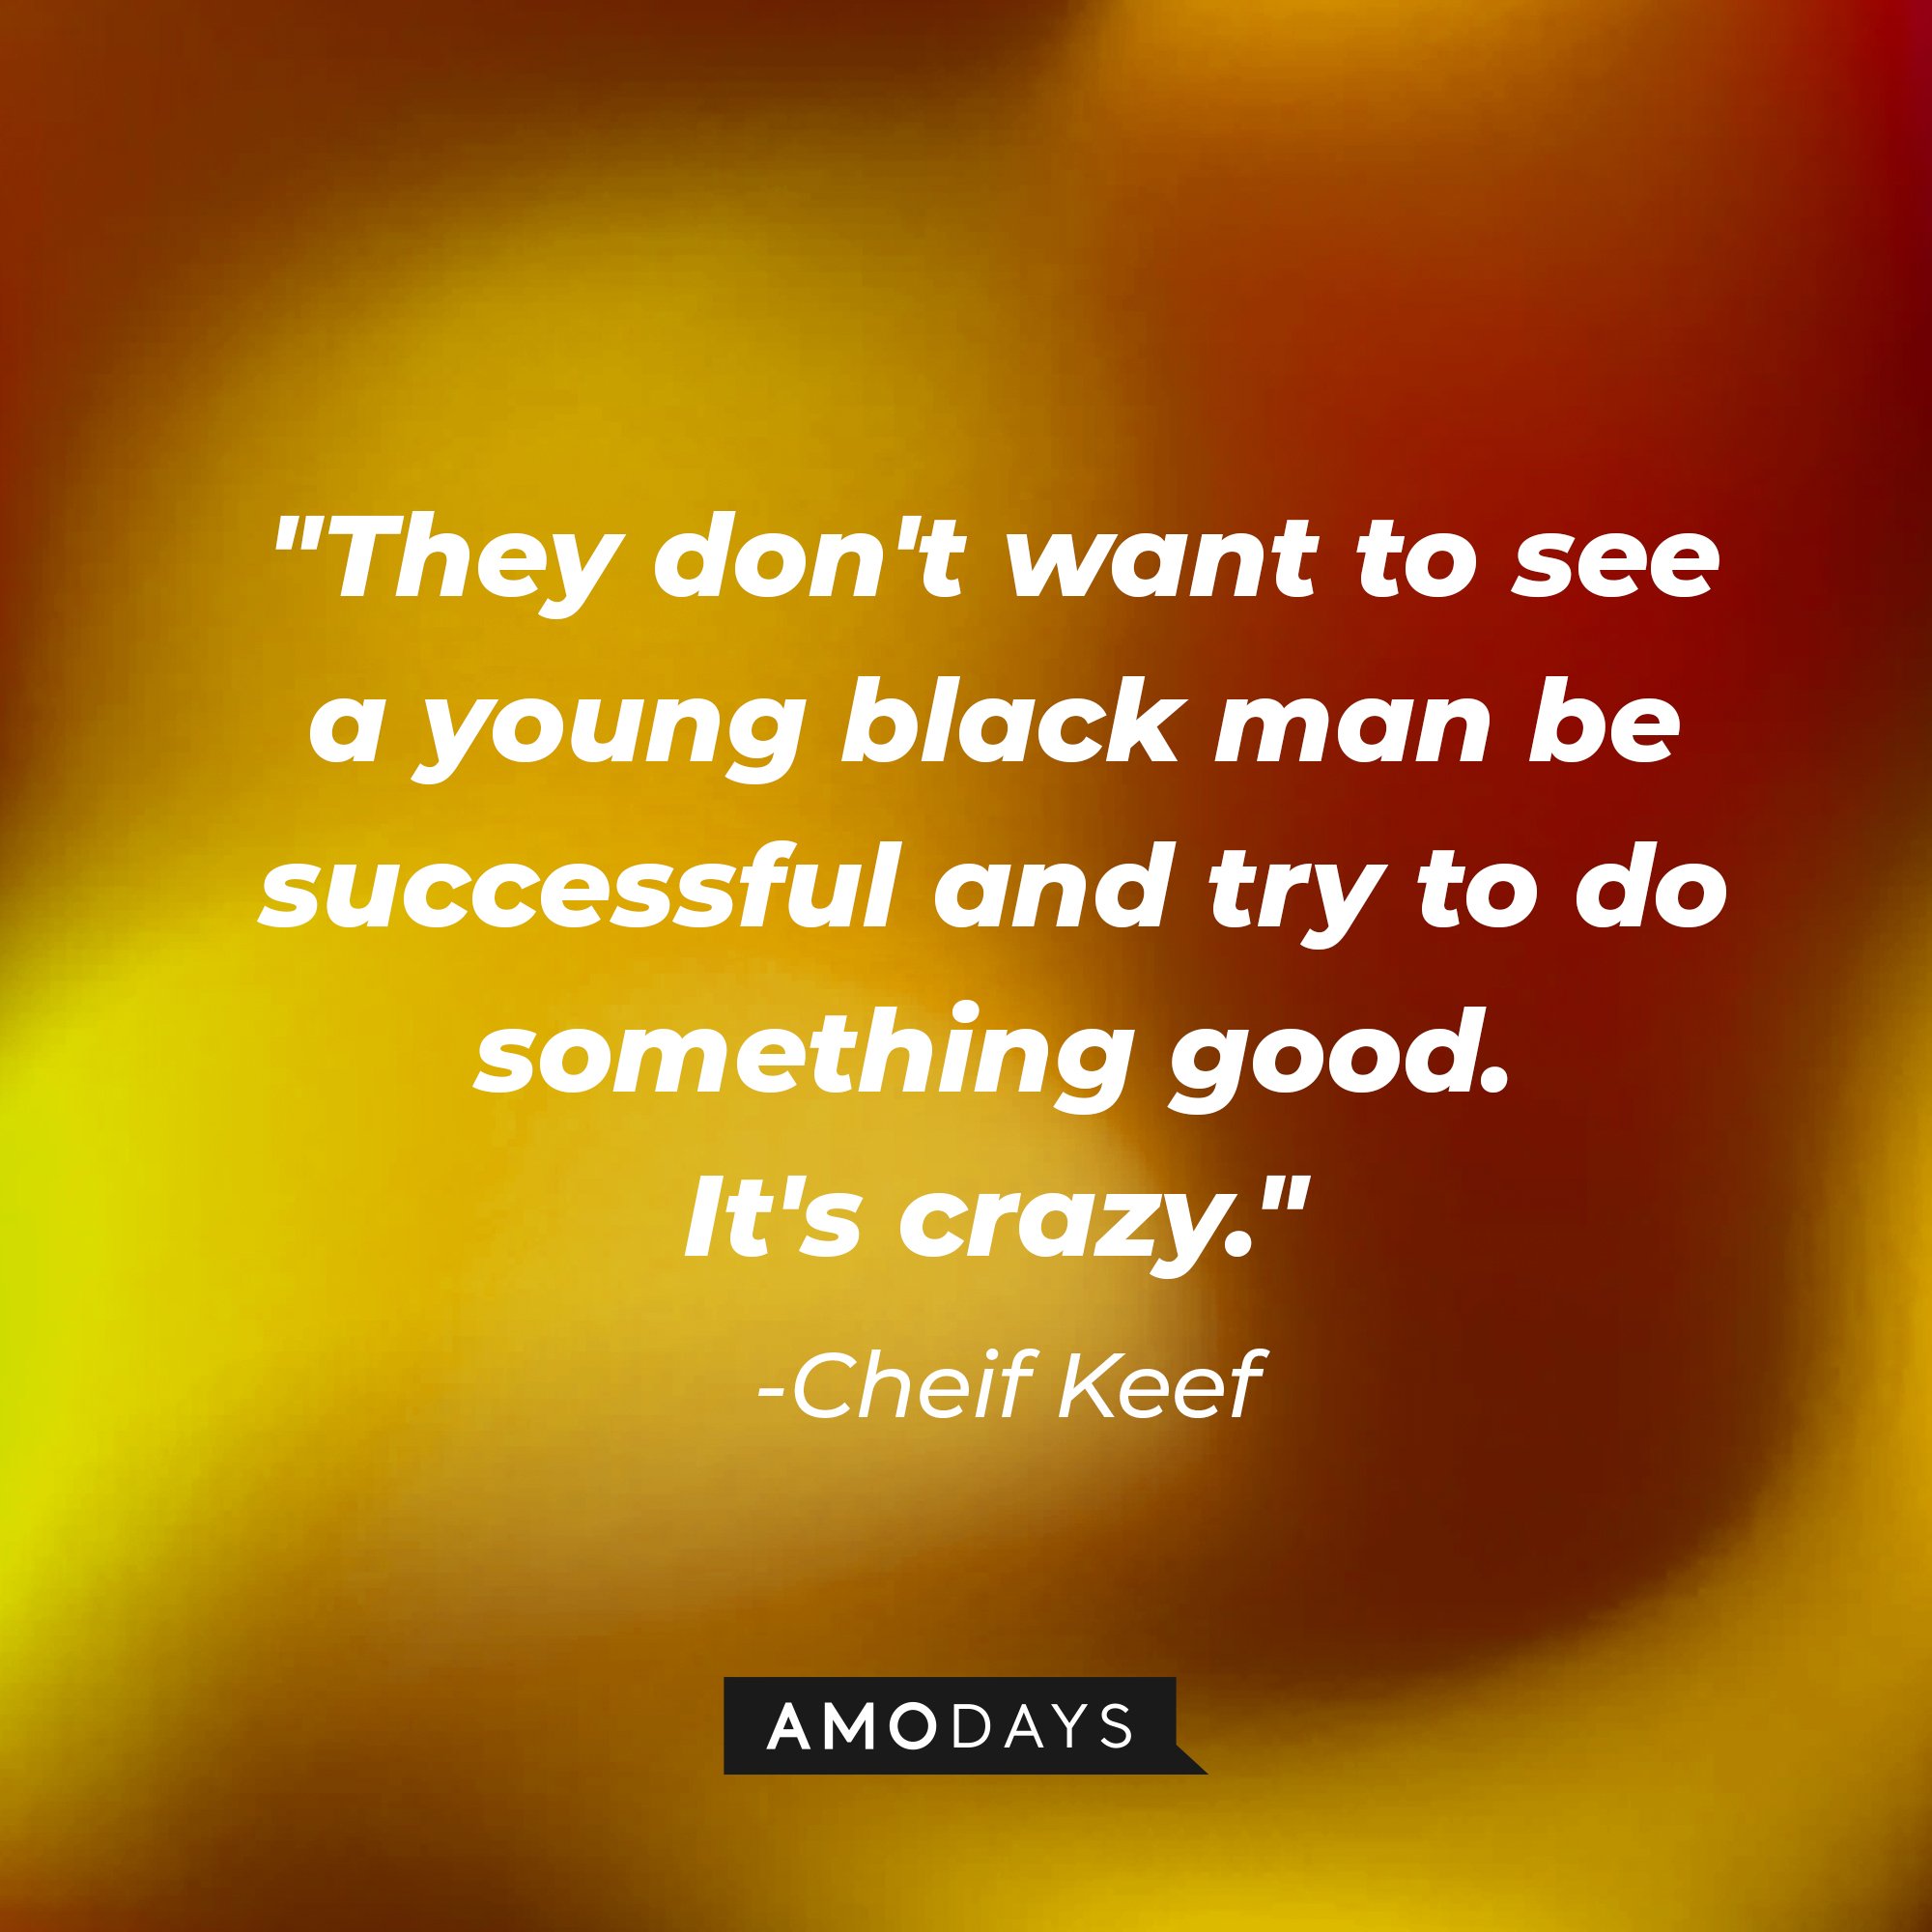  Chief Keef’s quote: "They don't want to see a young black man be successful and try to do something good. It's crazy."| Image: AmoDays  